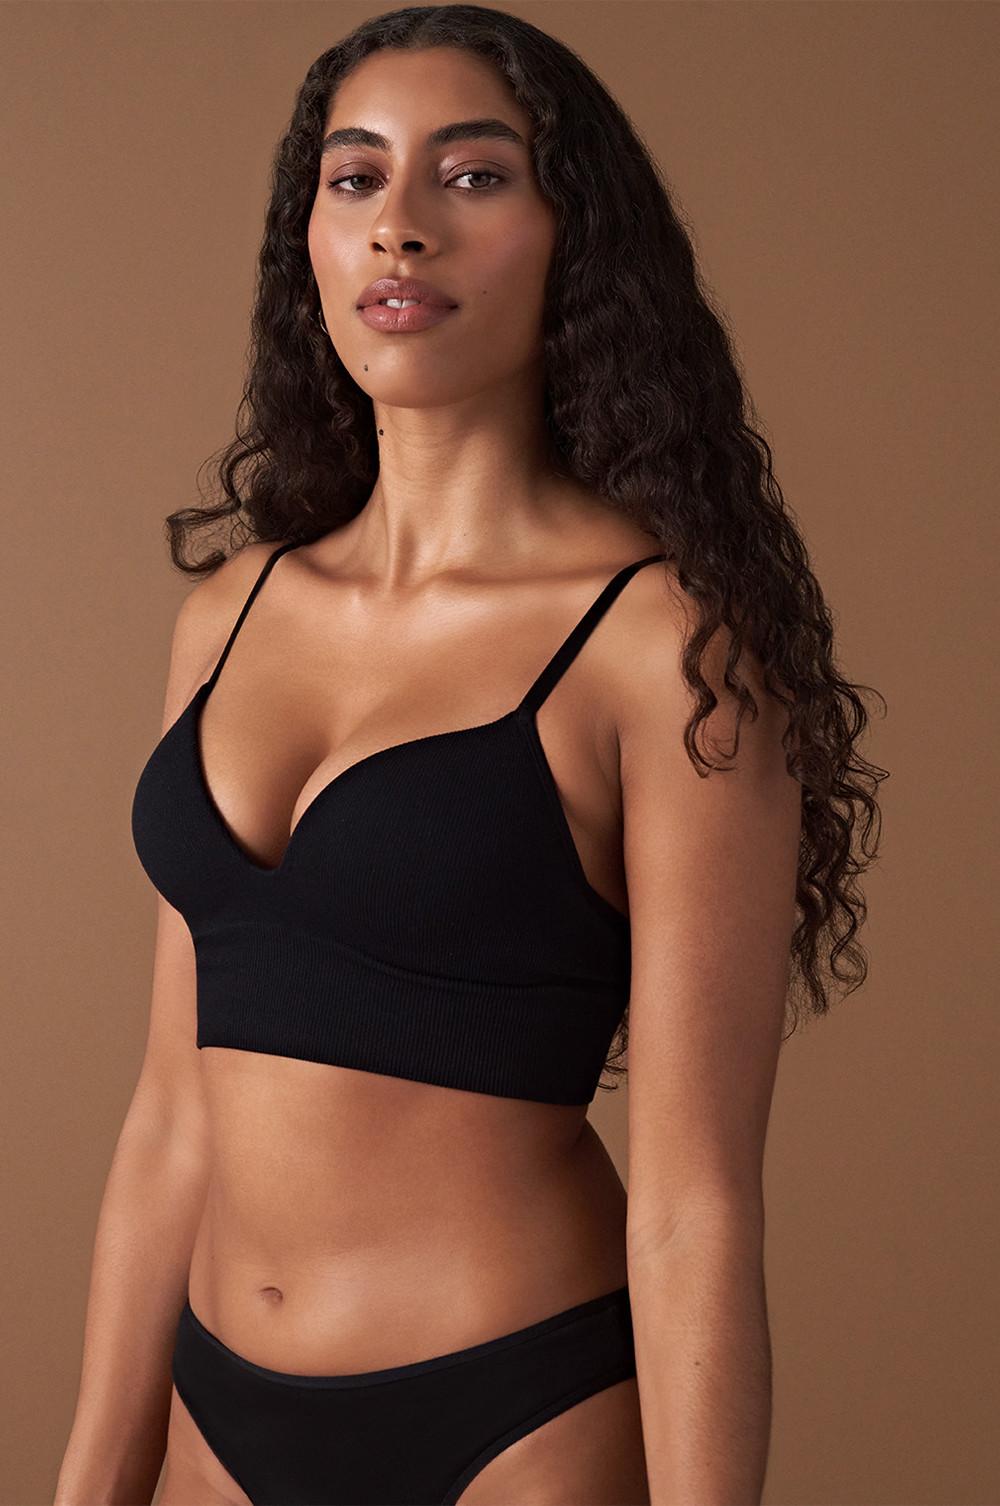 6 SIMPLE REASONS YOU SHOULDN'T MEASURE YOUR BRA SIZE AT HOME